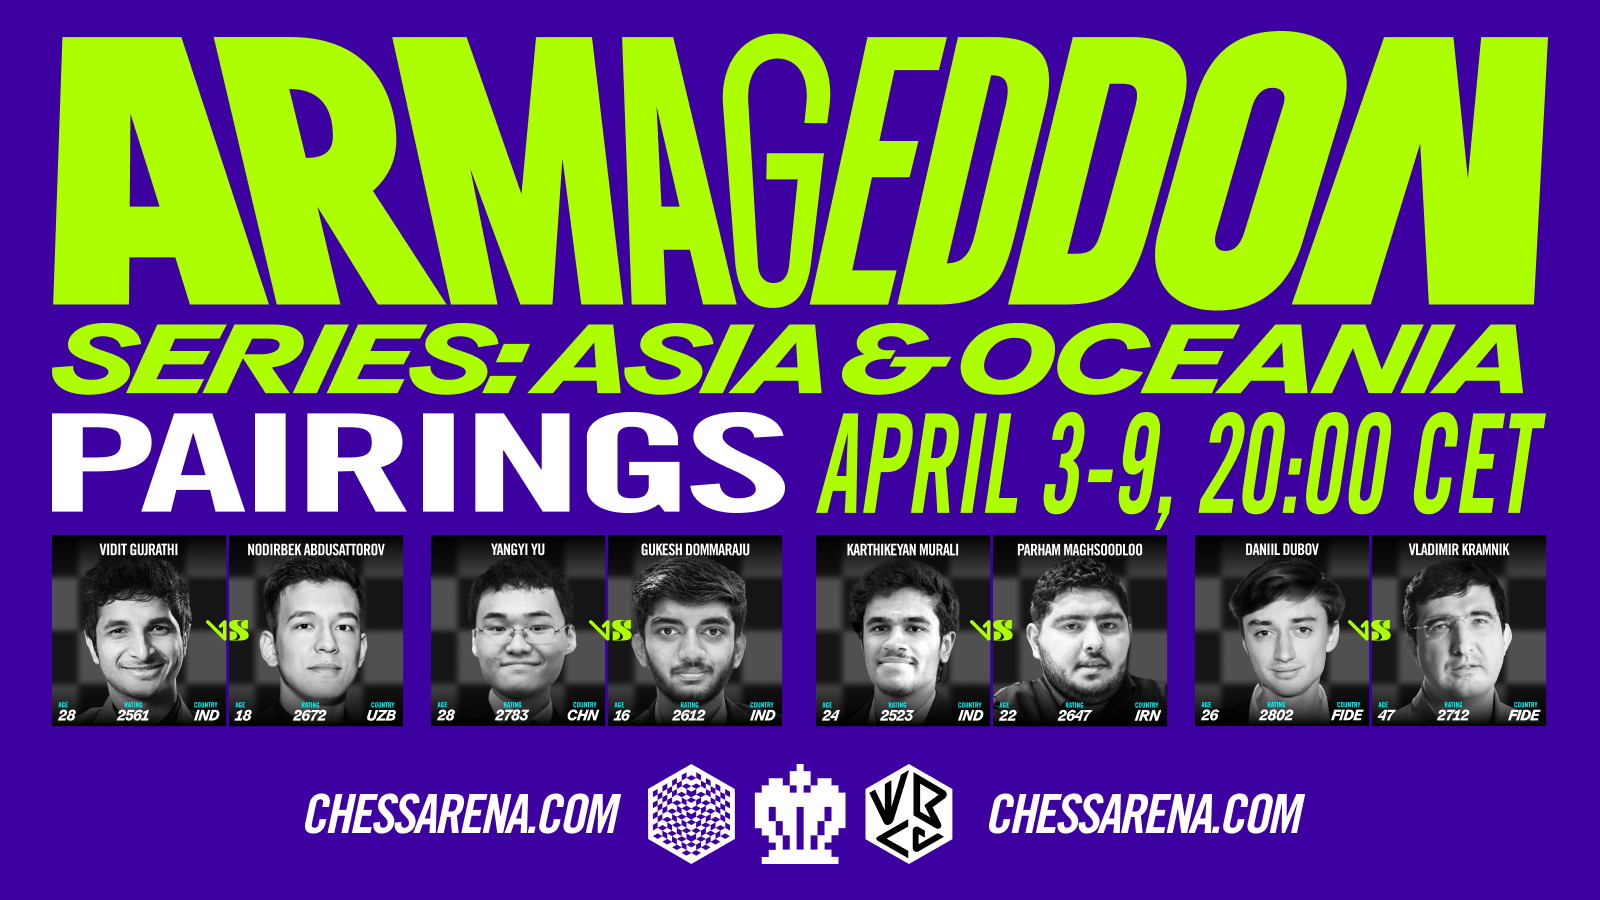 ChessBase India - From June 2017 to April 2019 Vladimir